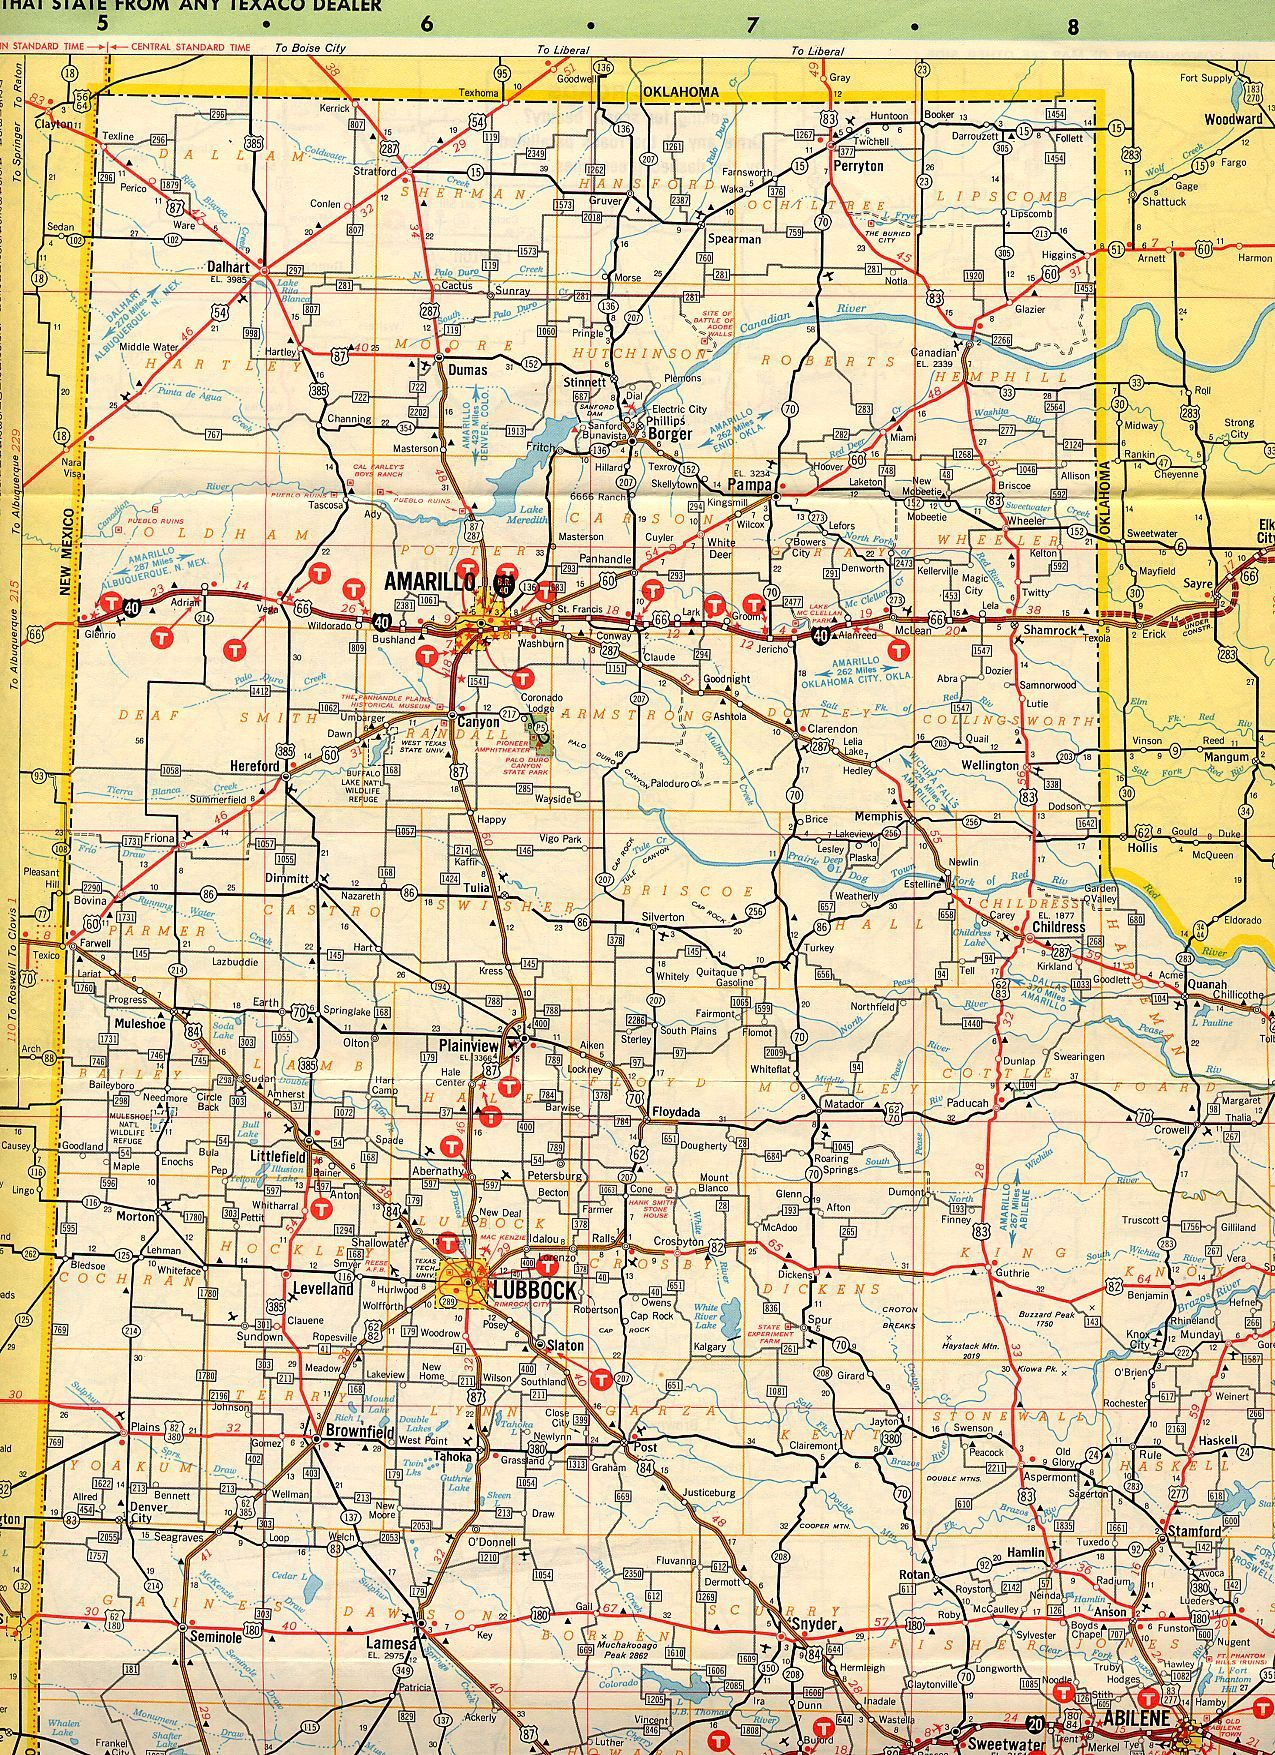 Map Of The Texas Panhandle Texas Panhandle 60th Anniversary Parties 